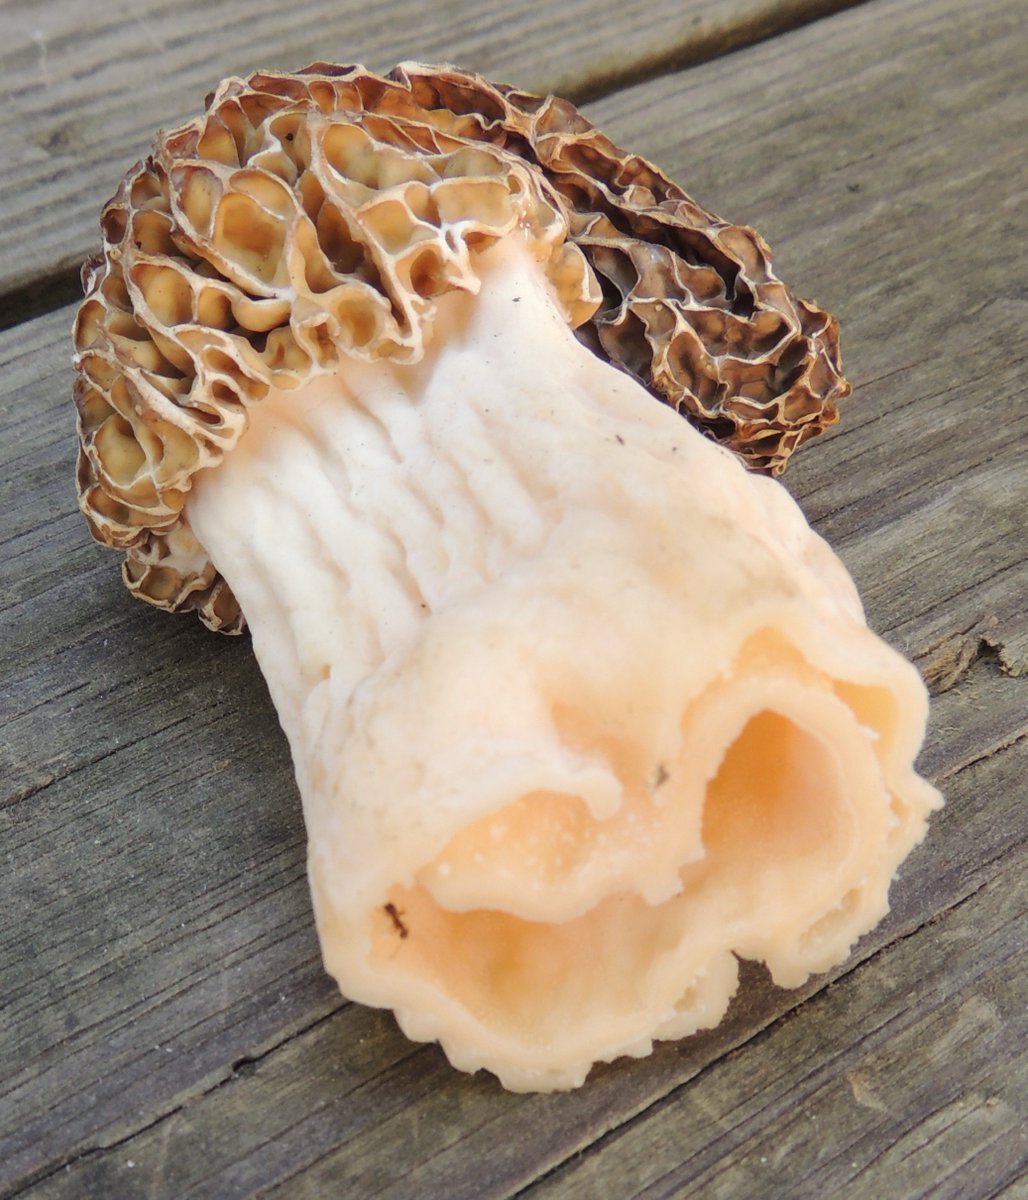 Found this little guy growing in my yard today :)
'Bon appetit'
#morel #morelmushroom #mushroomhunting
Lincoln NE 68521 May 11, 2024
Cherry and pear tree stumps nearby.  Also live ash, maple, oak, peach, spruce, and cherry trees nearby.